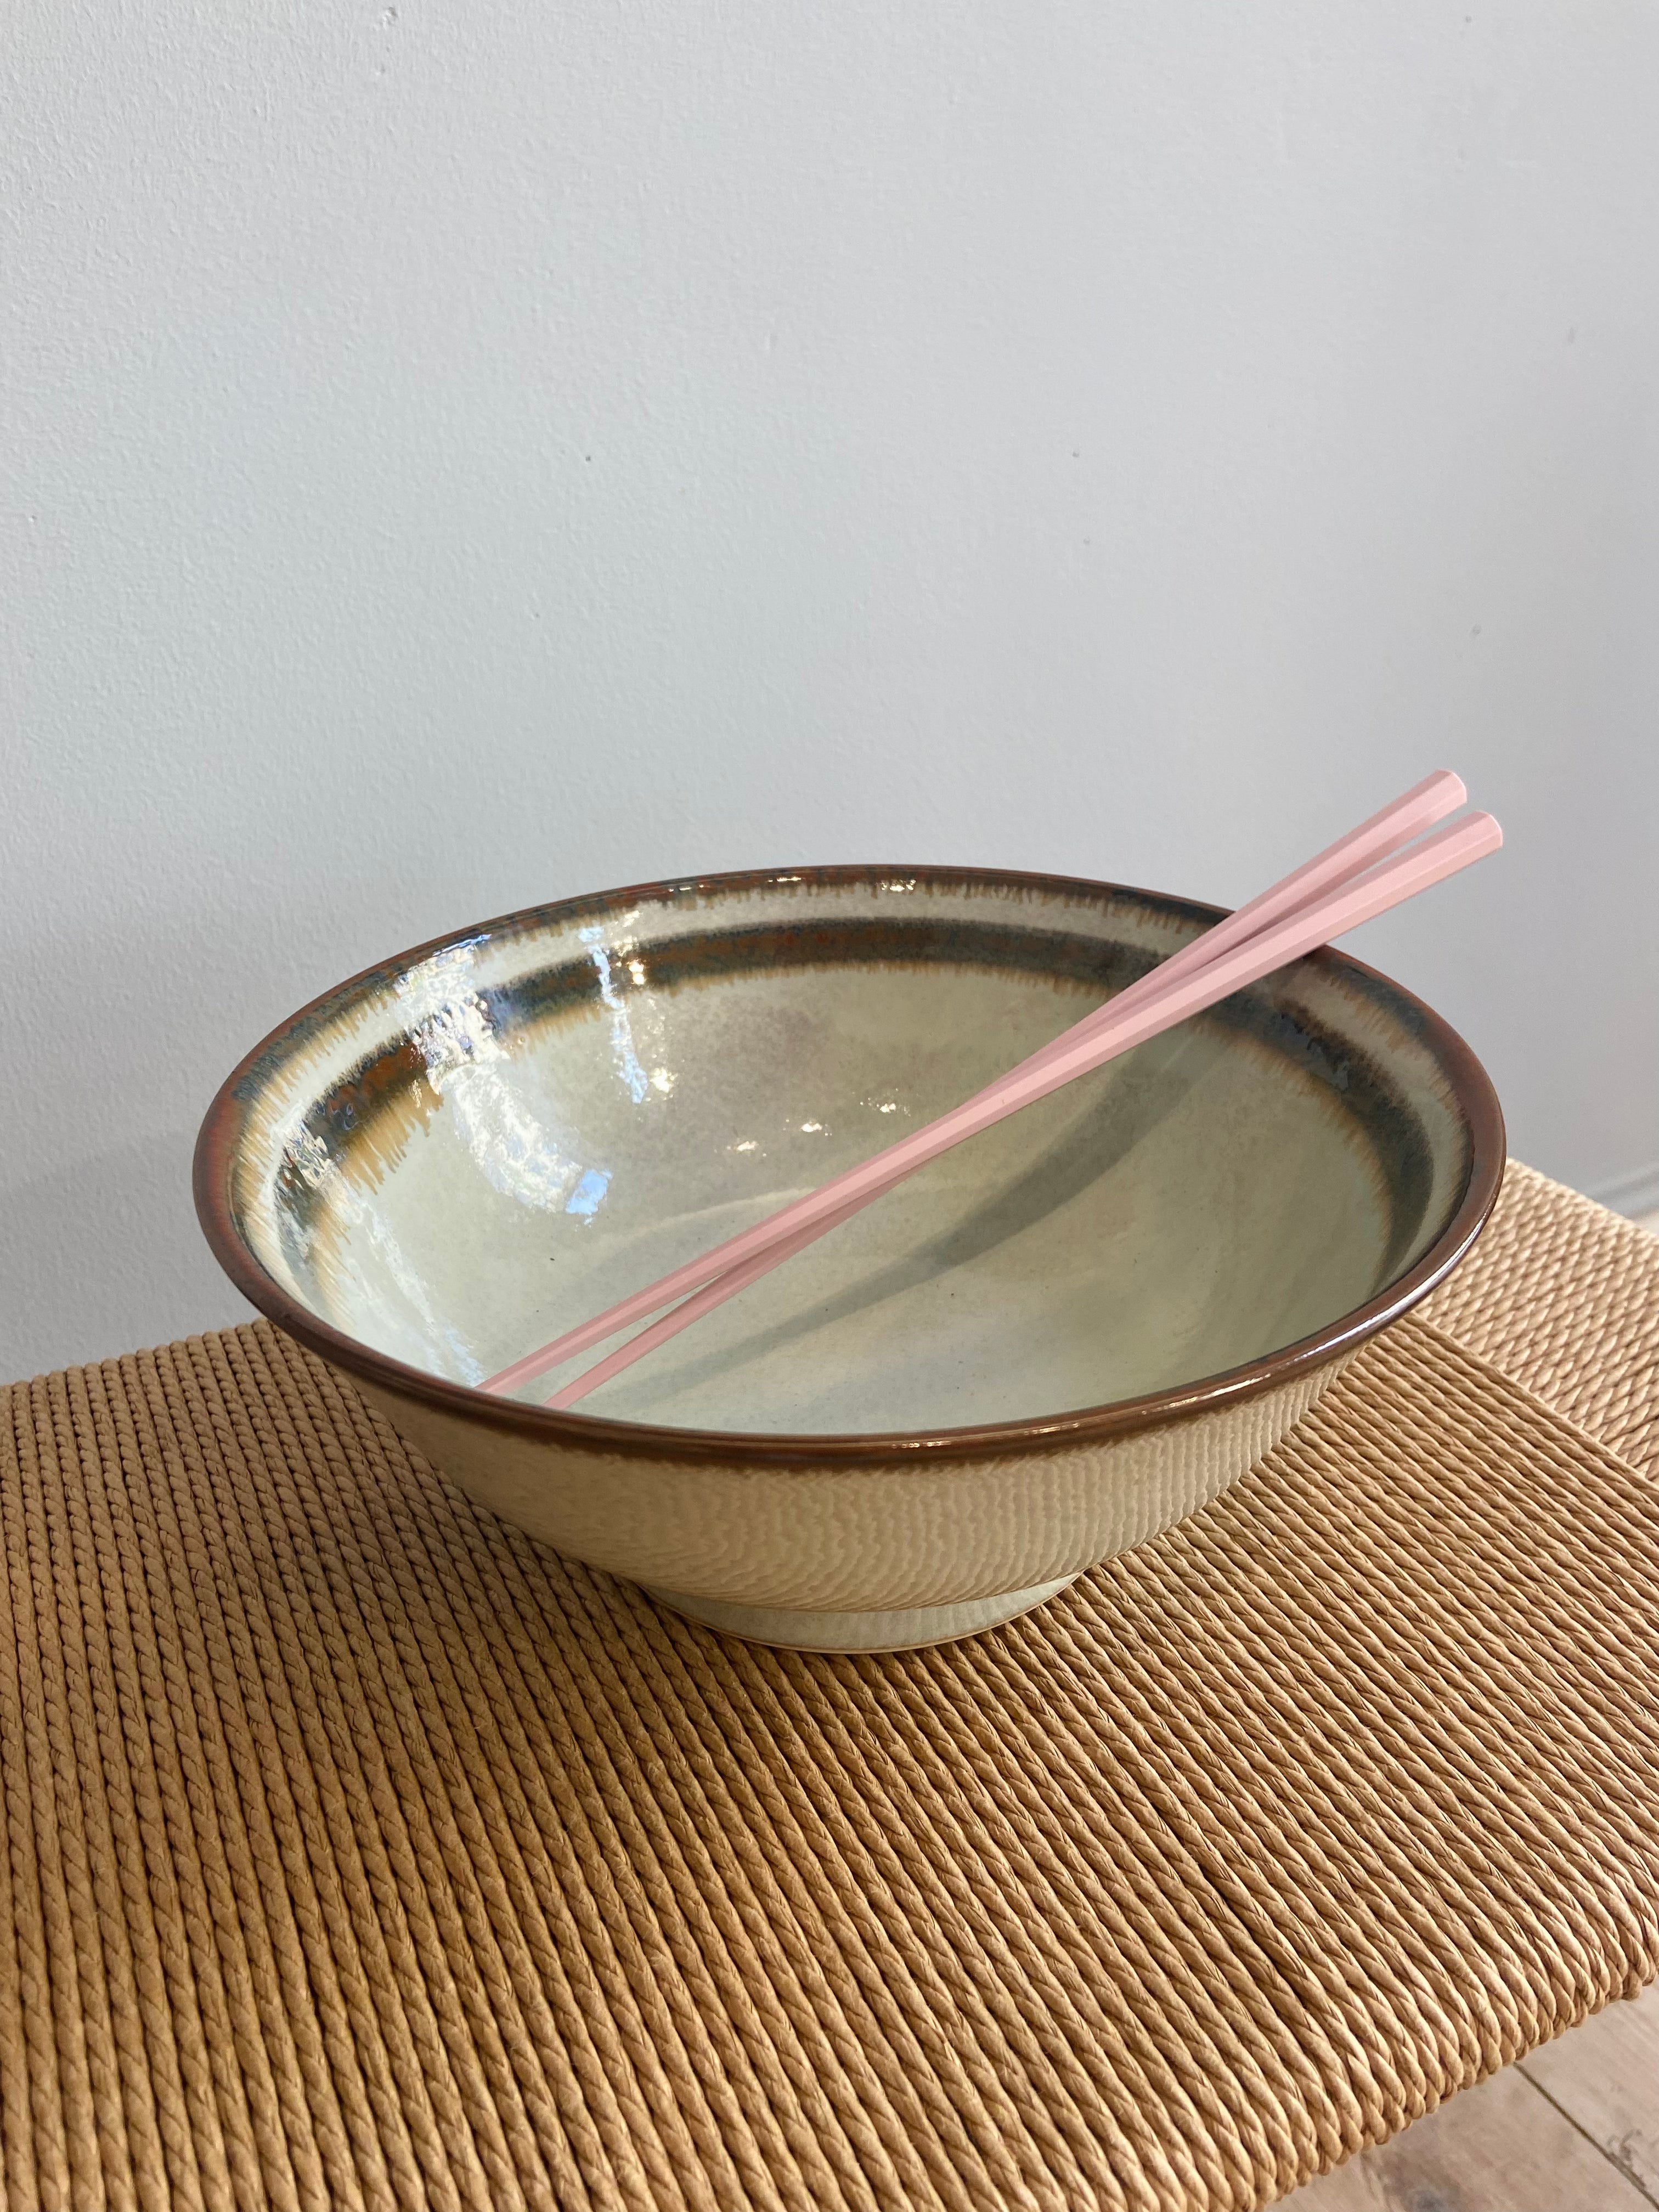 Japanese ramen bowl in brownish and beige shades